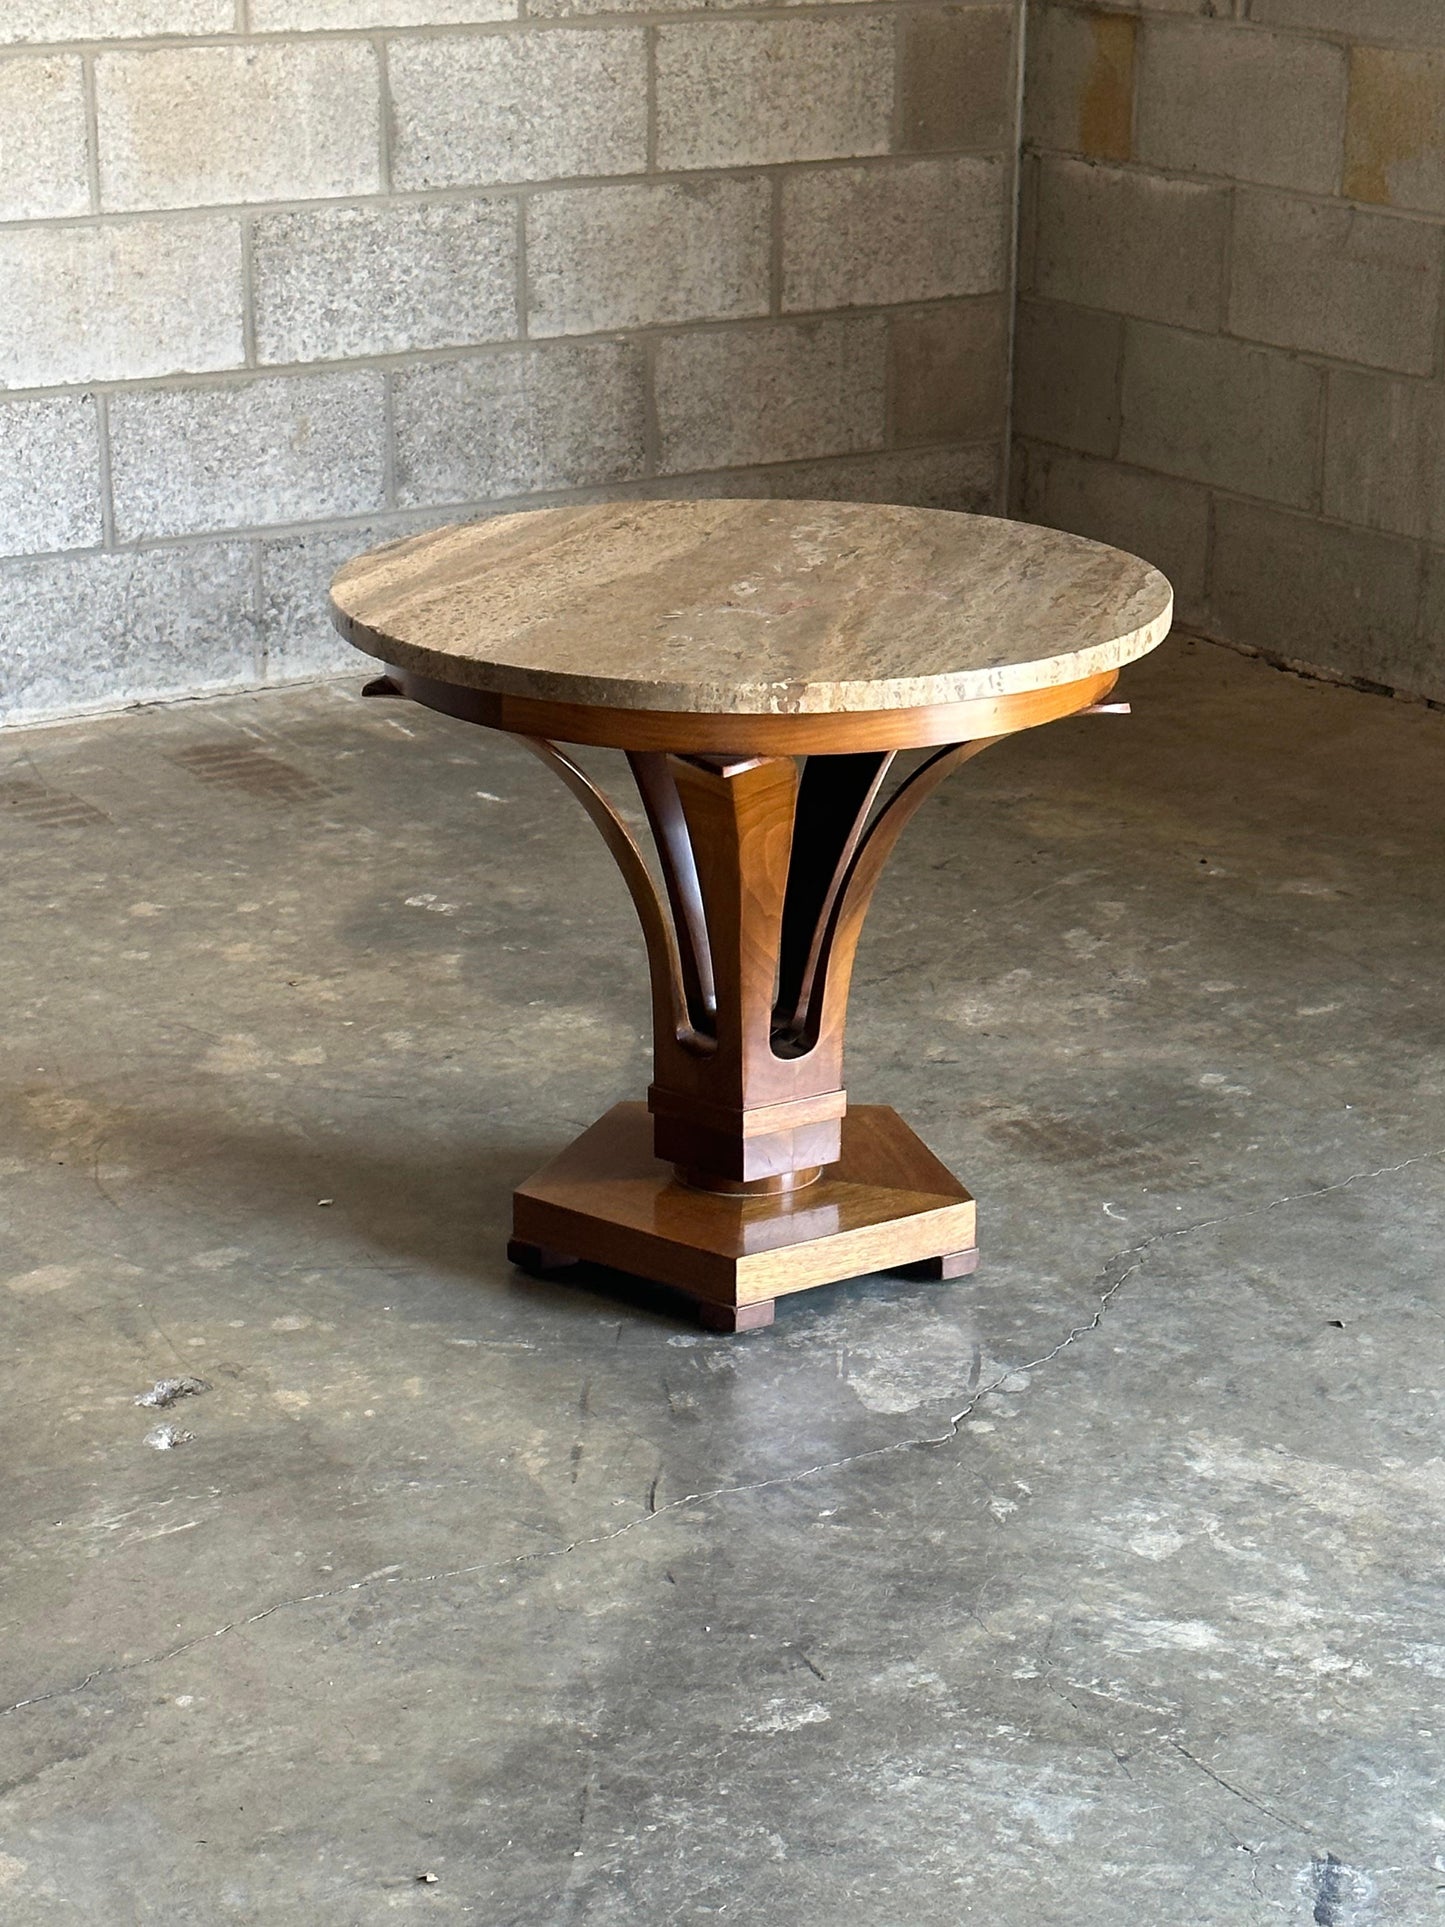 Edward Wormley for Dunbar Large Tulip End/ Side Table in Travertine and Walnut